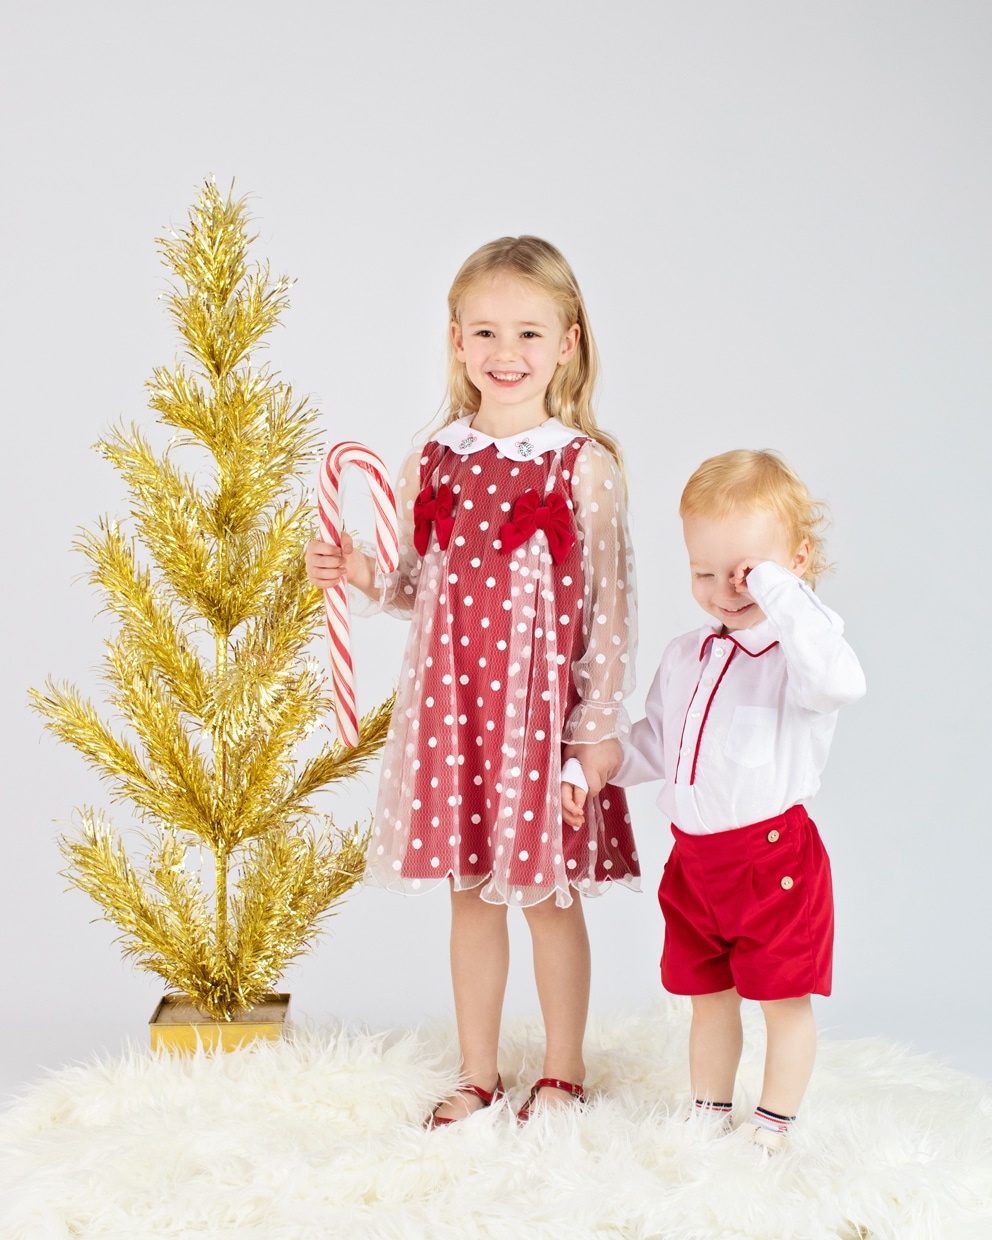 adorable kids posing in front of gold Christmas tree for the holidays